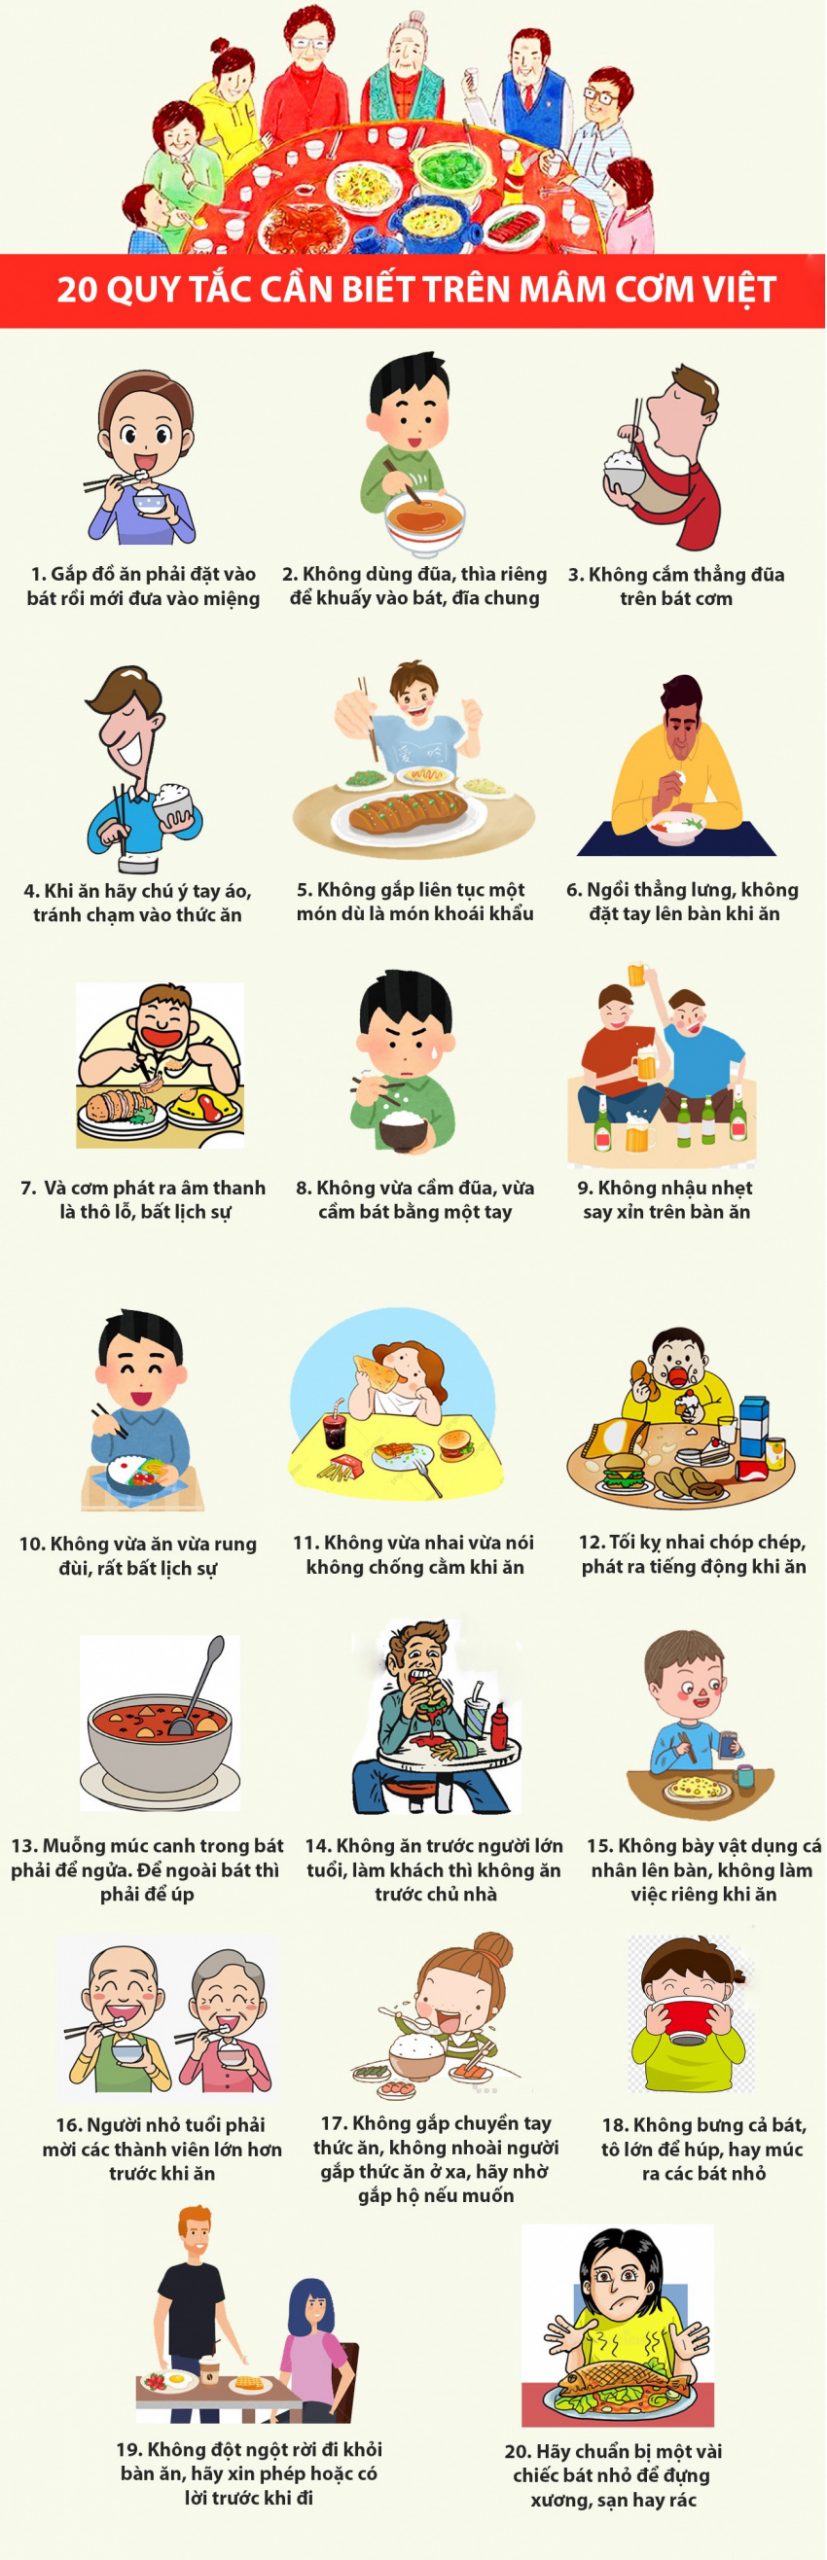 20 rules of conduct on a Vietnamese rice tray to stay elegant while dining